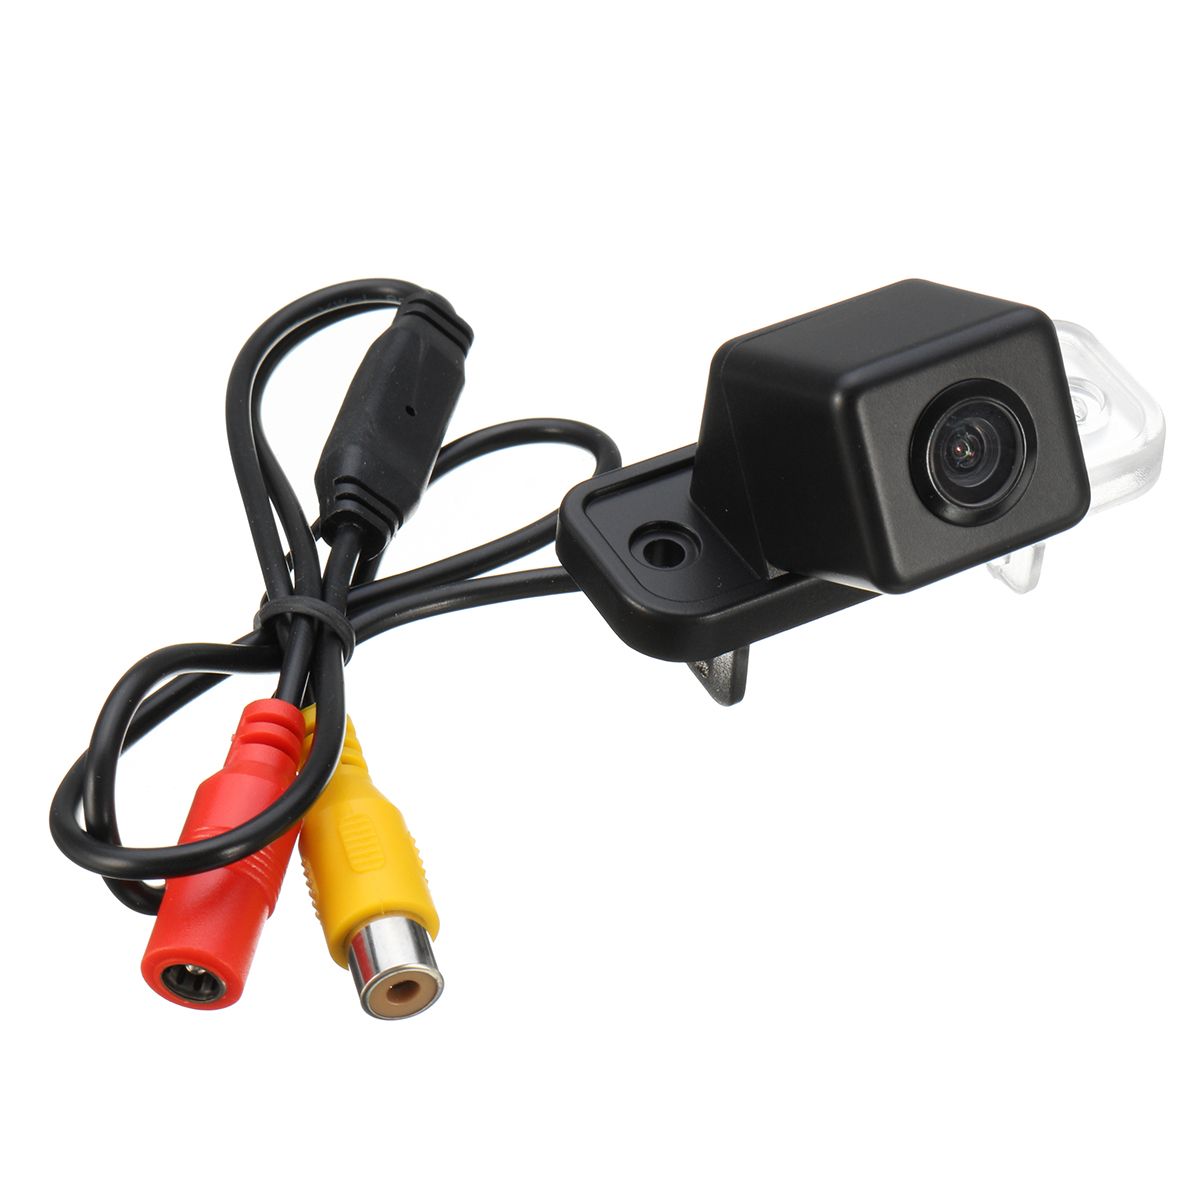 Car-Wireless-CCD-Reverse-Rear-View-Camera-For-Mercedes-C-Class-W203-W211-CLS-1147798